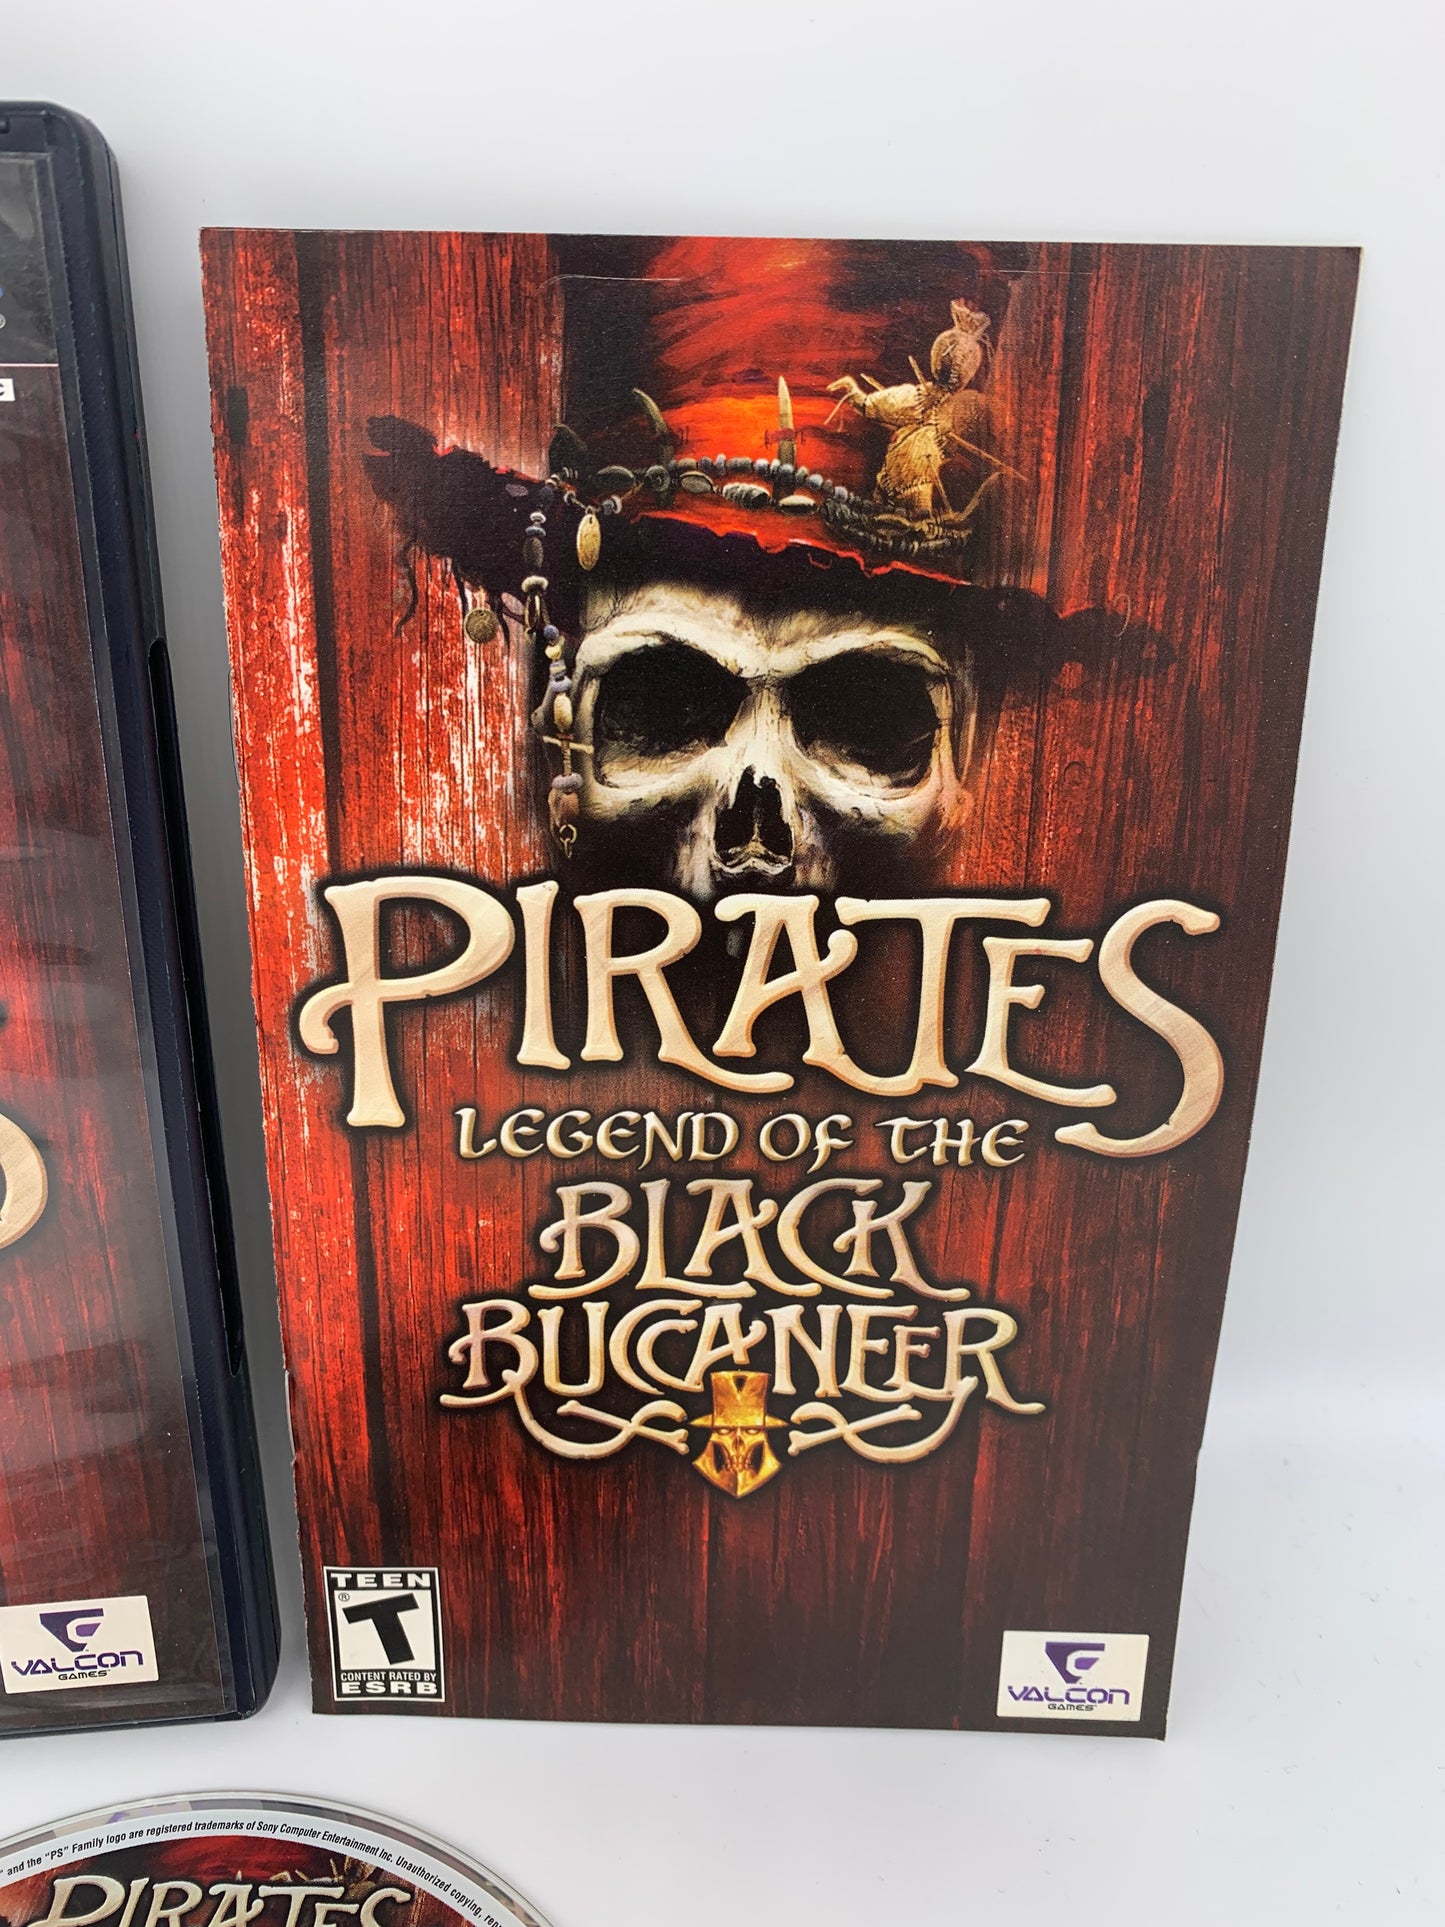 SONY PLAYSTATiON 2 [PS2] | PiRATES LEGEND OF THE BLACK BUCCANEER